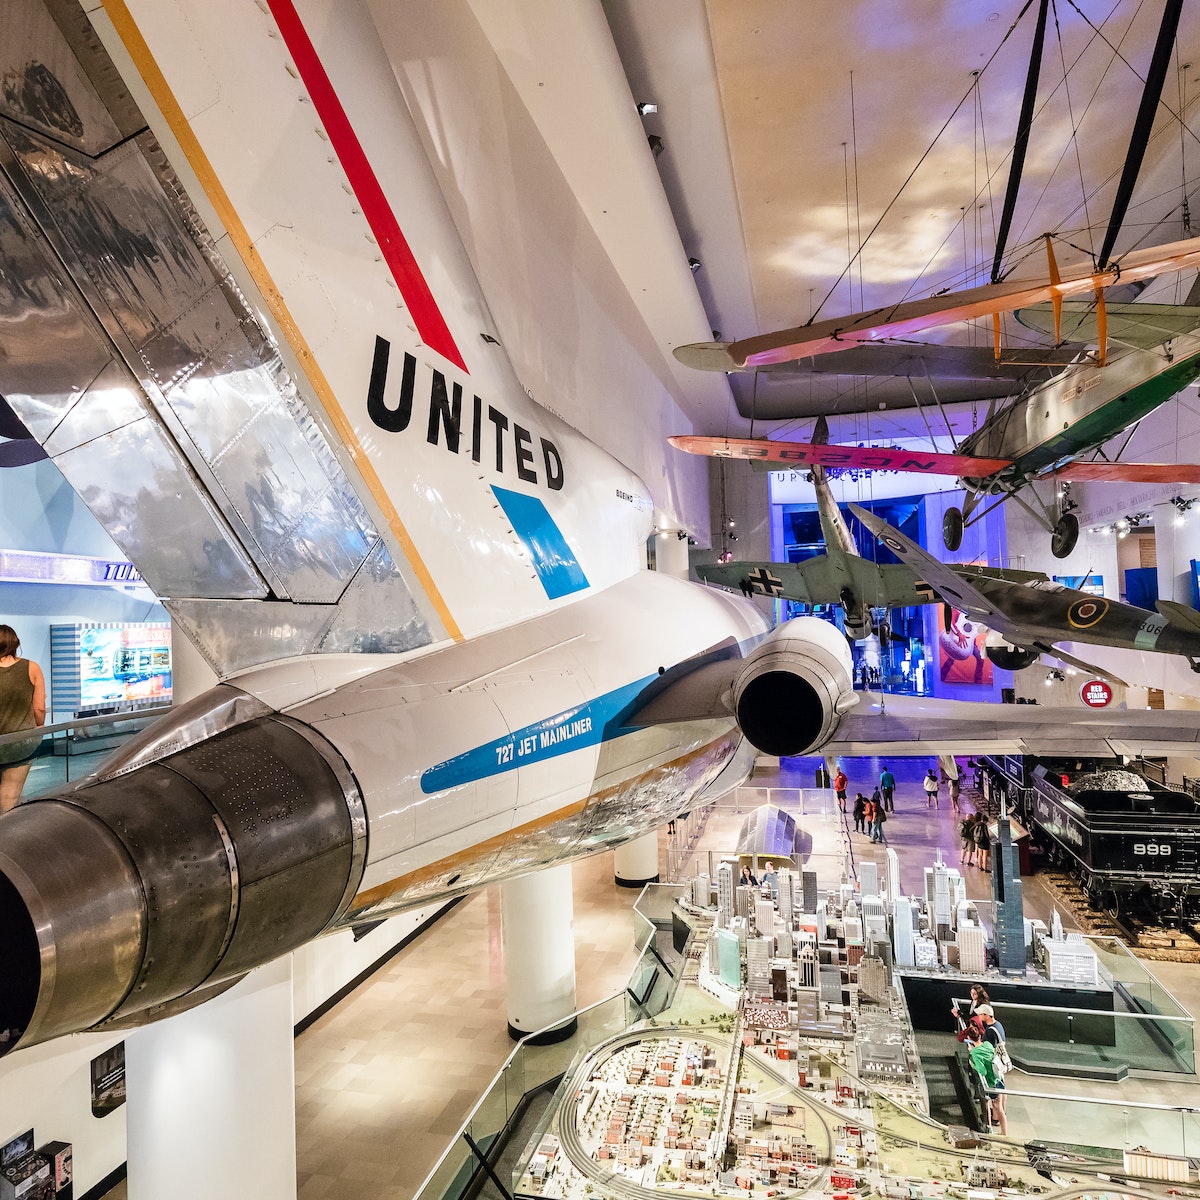 JUNE 24, 2018: Planes hanging from the ceiling inside the Museum of Science and Industry.